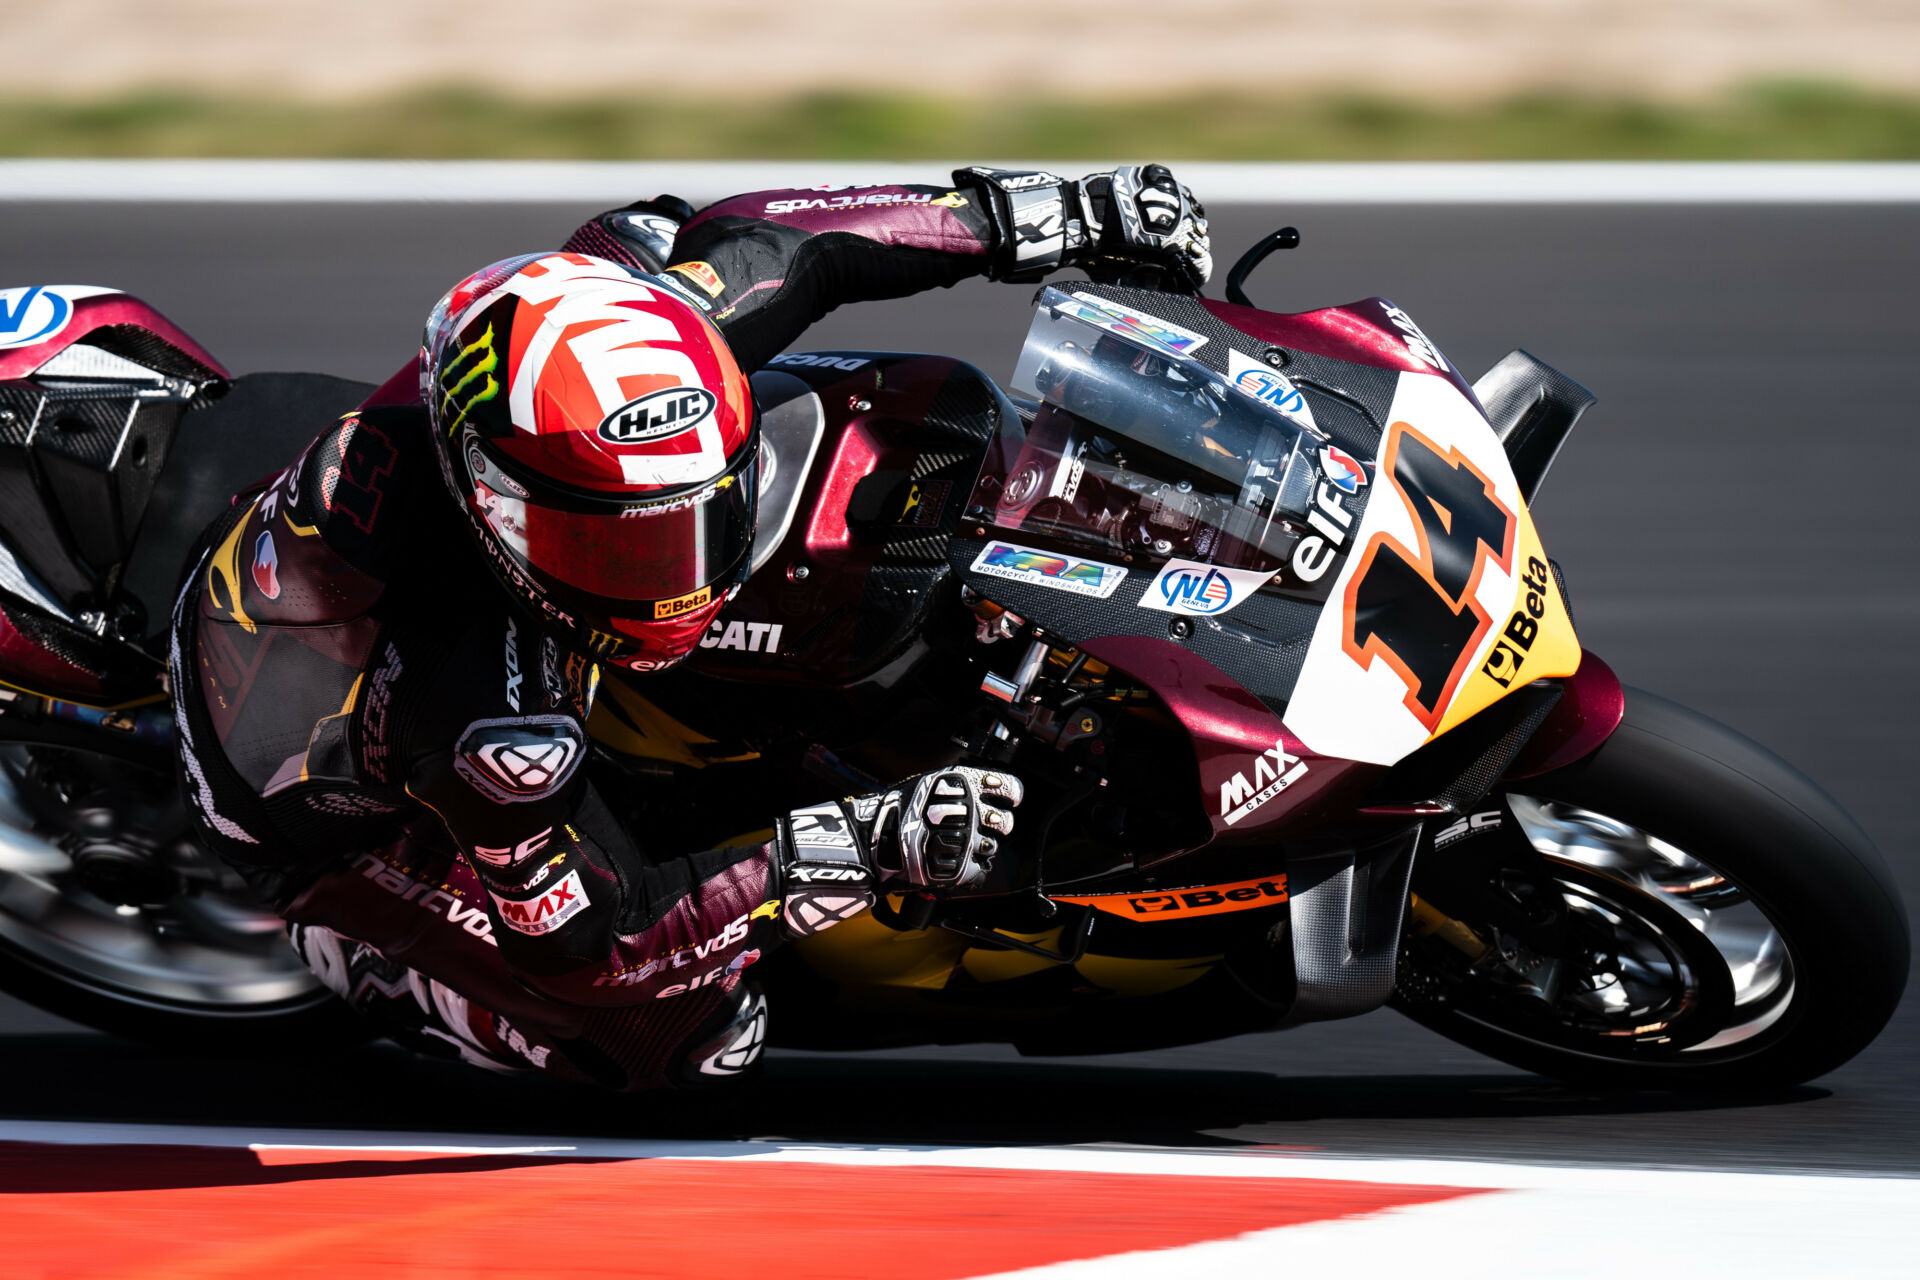 Sam Lowes (14), as seen at Autodrom Most. Photo courtesy Marc VDS Racing Team.